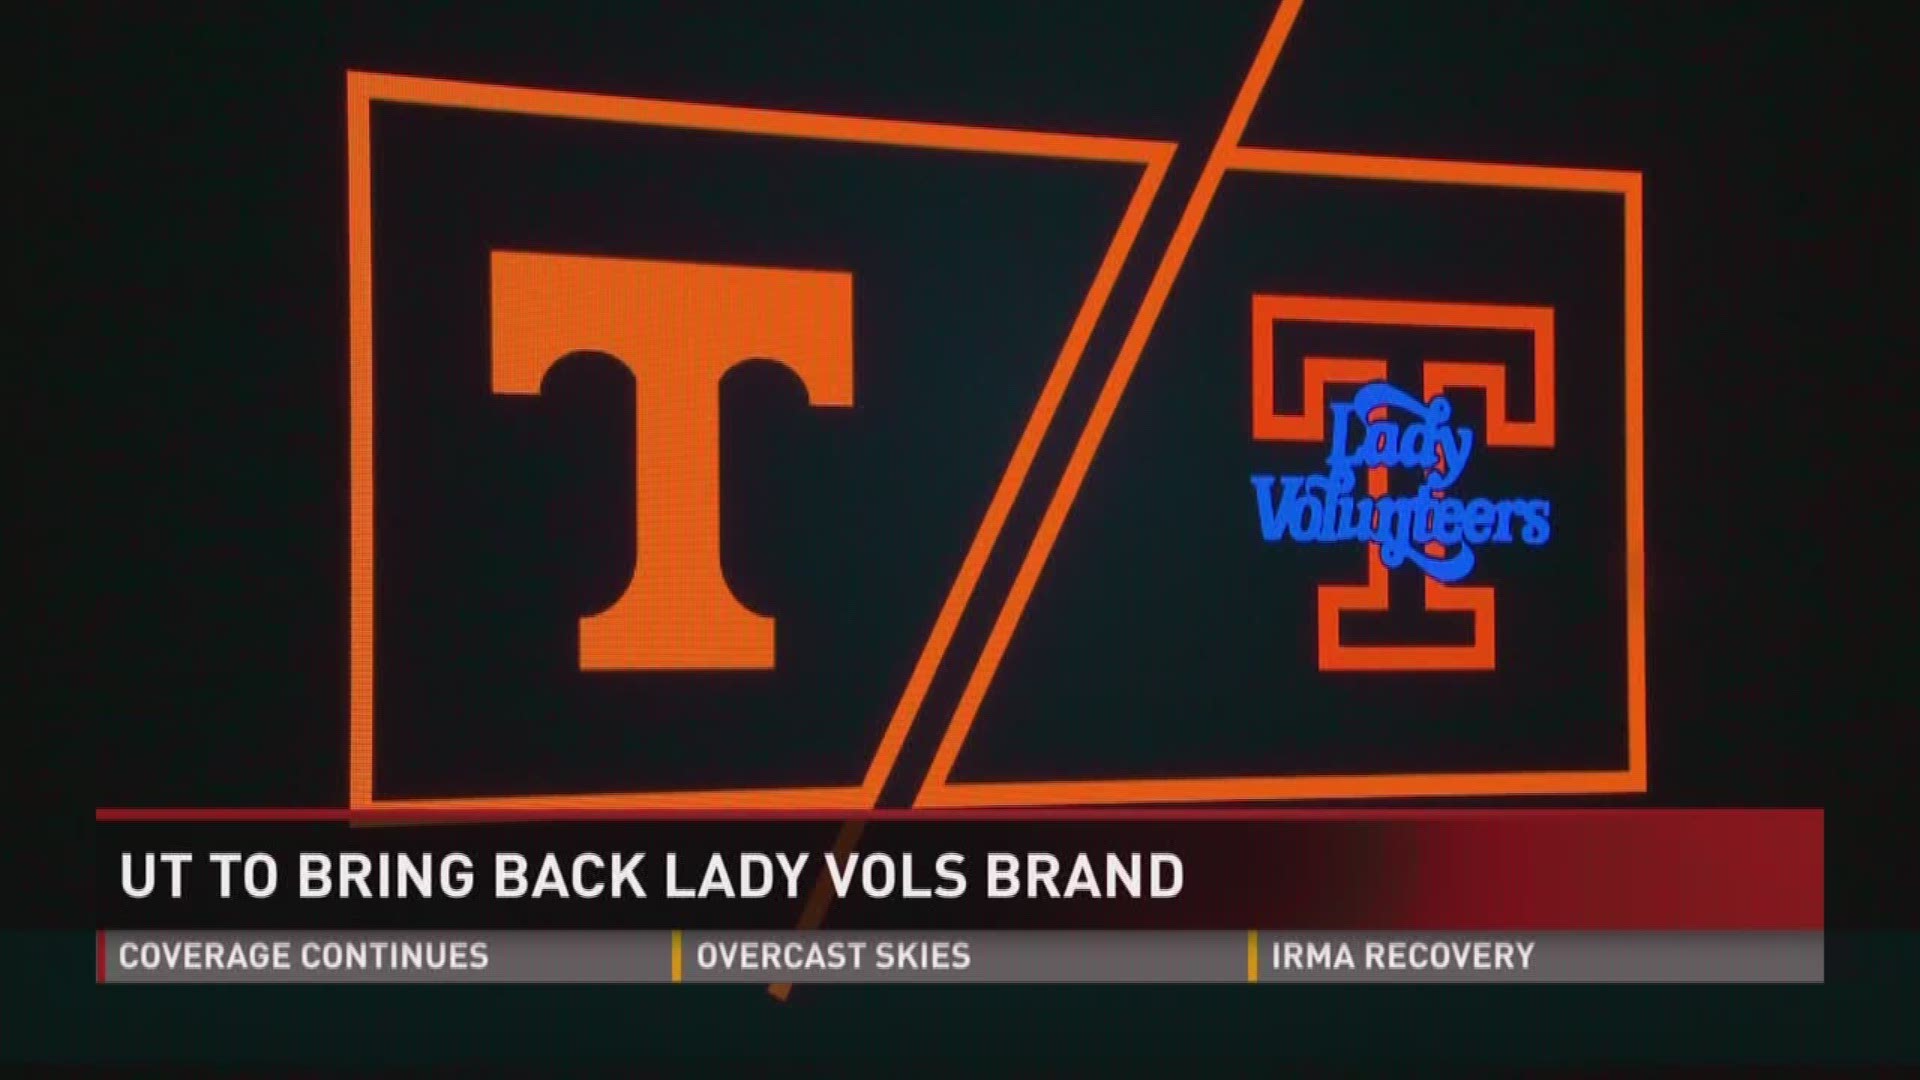 The University announced the Lady Vols brand will be brought back to the spotlight.